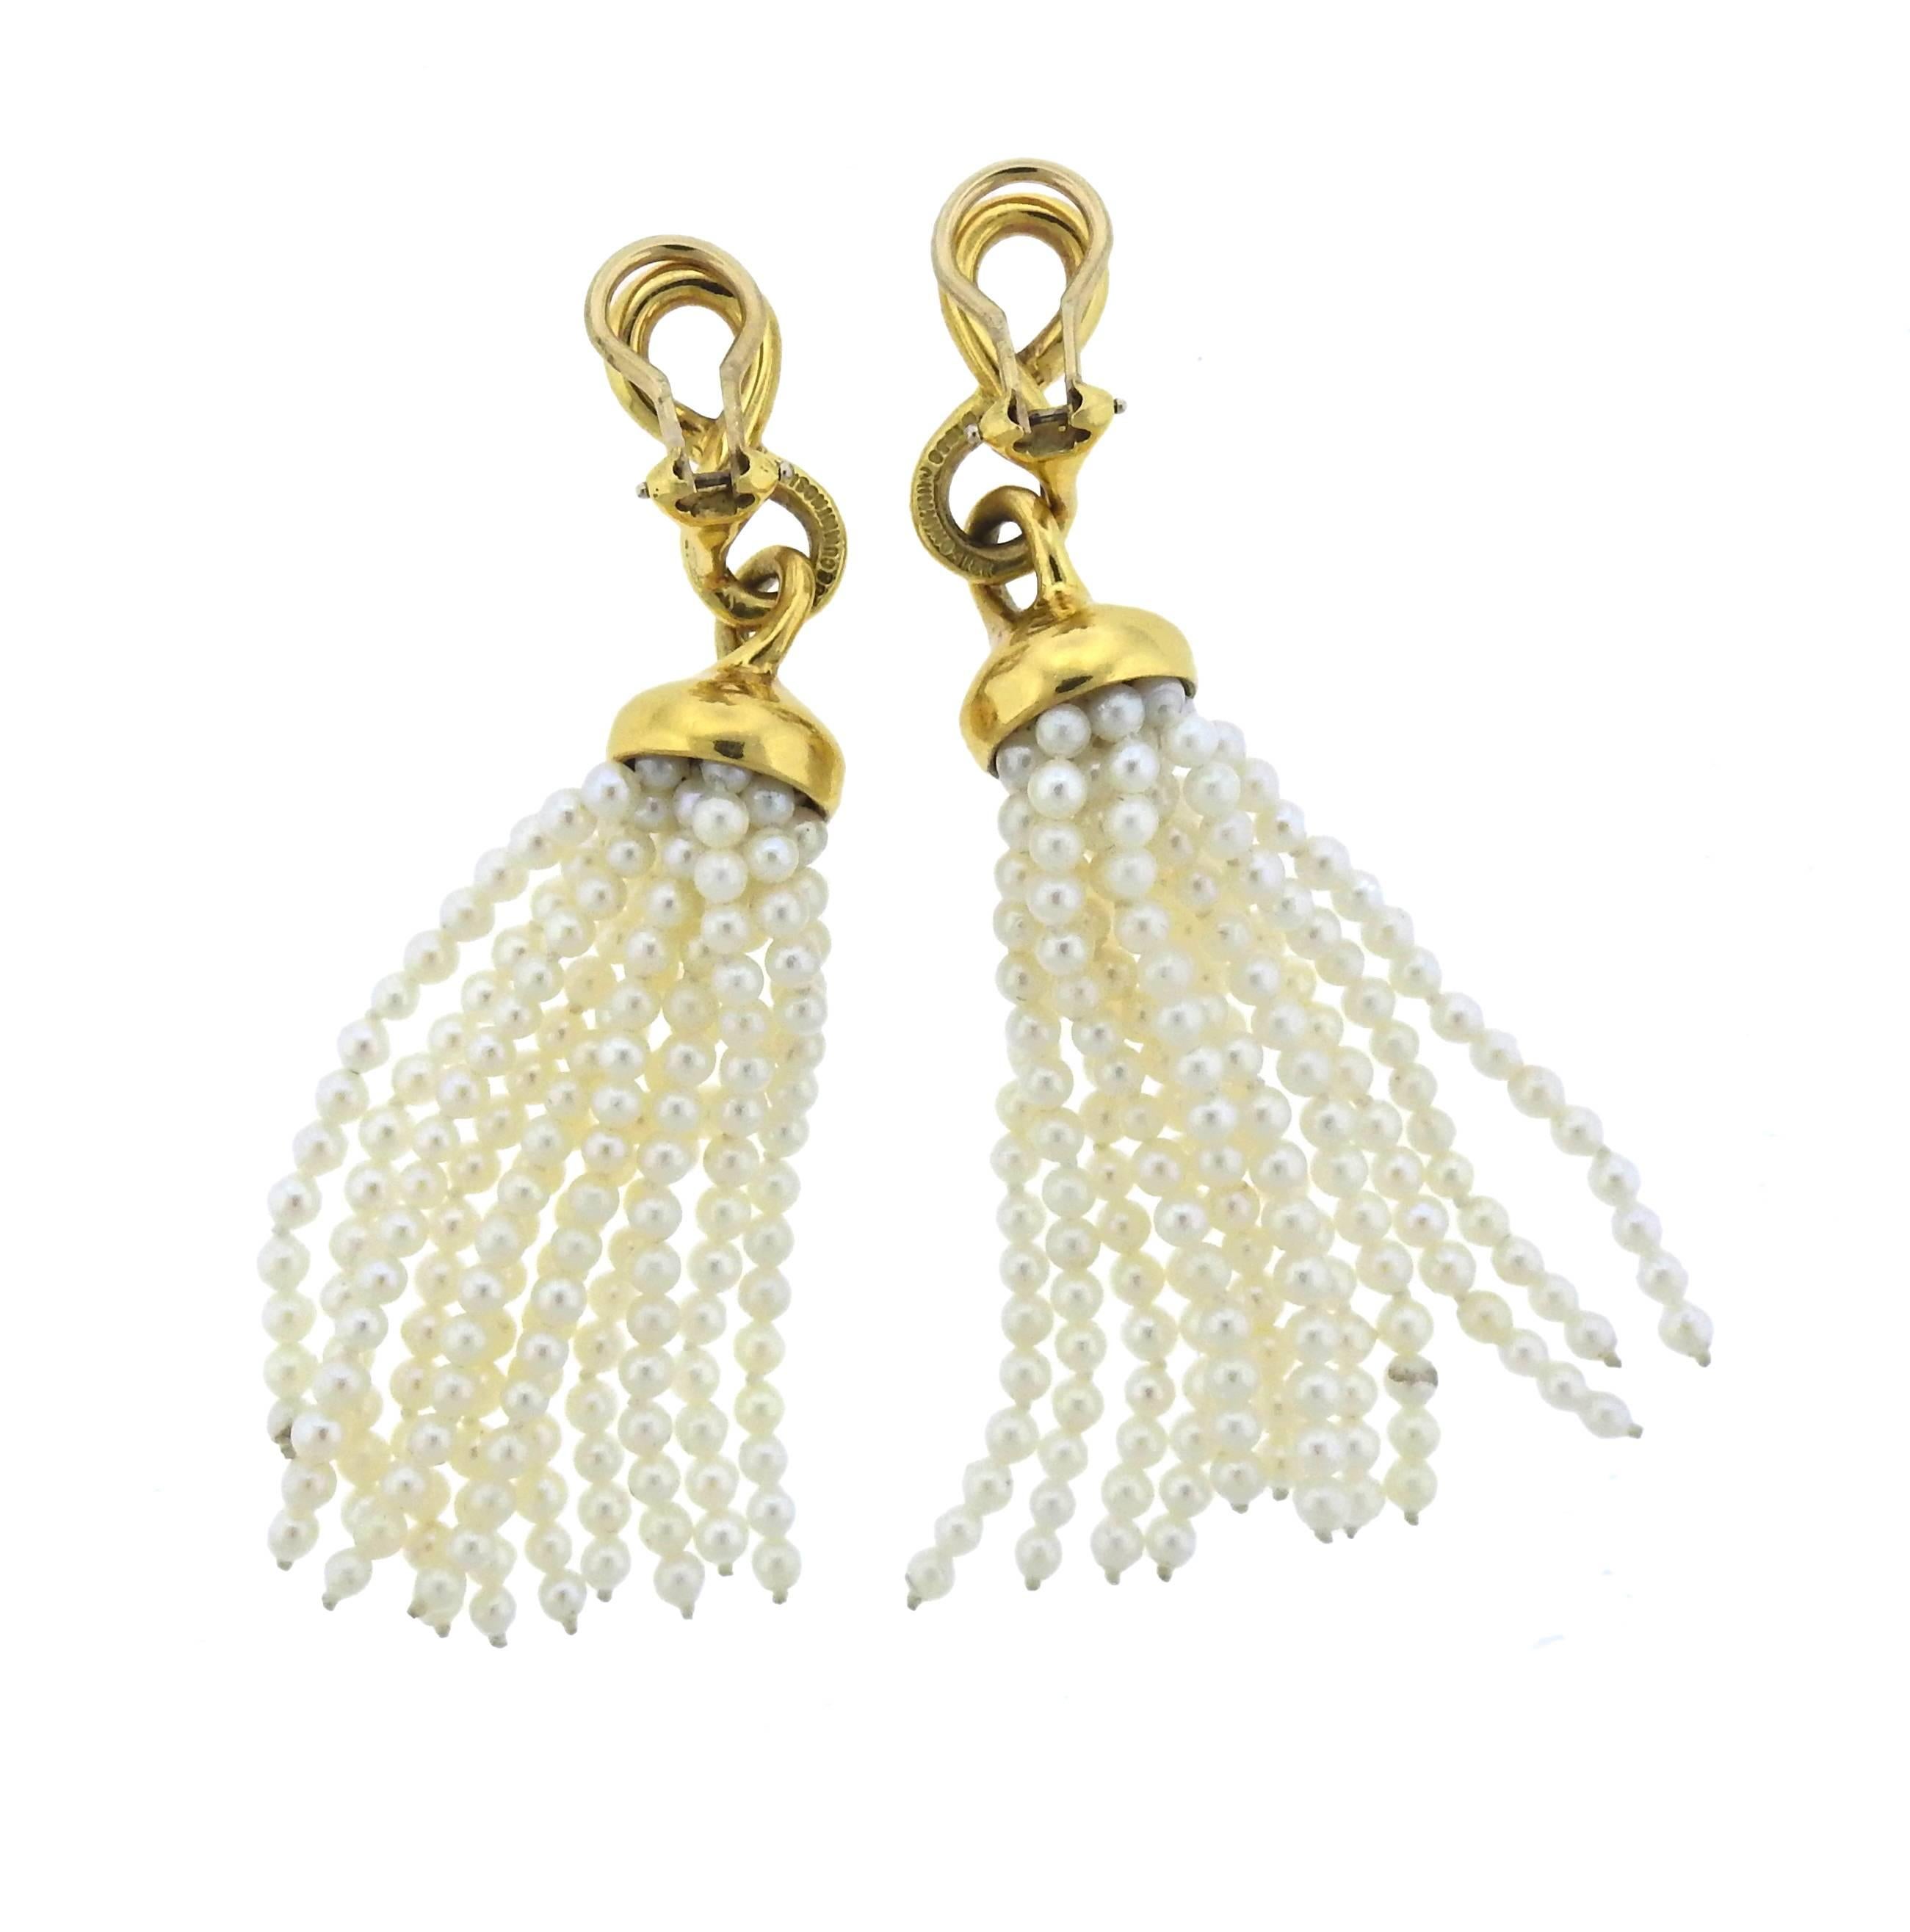  Pair of 18k yellow gold tassel earrings, crafted by Angela Cummings in circa 1980s, featuring 2.5-2.7mm pearls. Earrings are 73mm long, weigh 29.2 grams. Marked: 1988, Cummings, 18k.